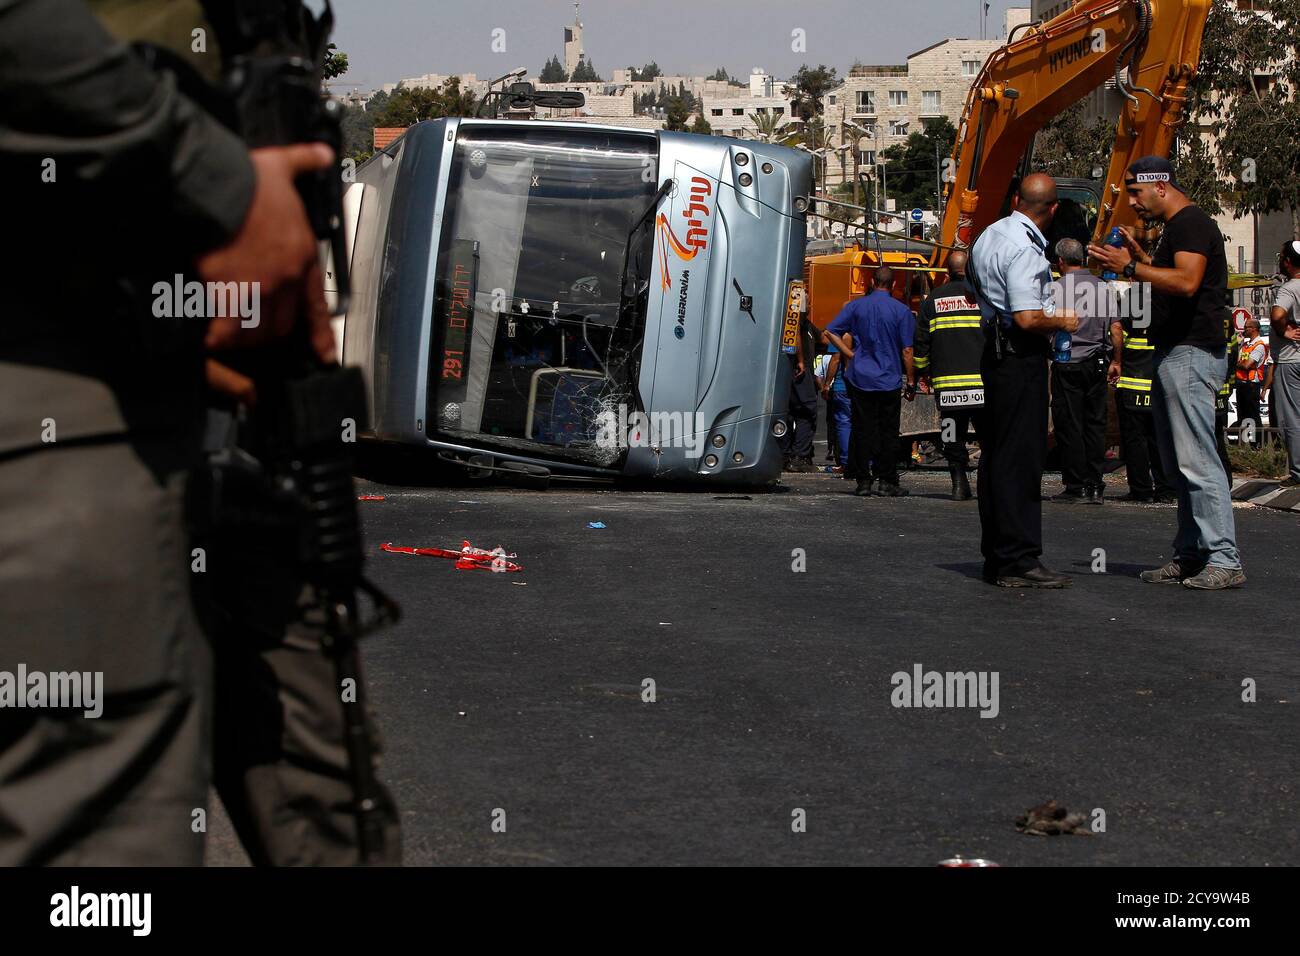 Israeli policemen stand next to an overturned bus at the scene of a suspected attack in Jerusalem August 4, 2014. A Palestinian used his heavy construction vehicle to run down and kill an Israeli and overturn the bus on a main Jerusalem street on Monday in attacks that ended when policemen shot him dead, police said. REUTERS/Siegfried Modola (JERUSALEM - Tags: POLITICS CIVIL UNREST TPX IMAGES OF THE DAY) Stock Photo